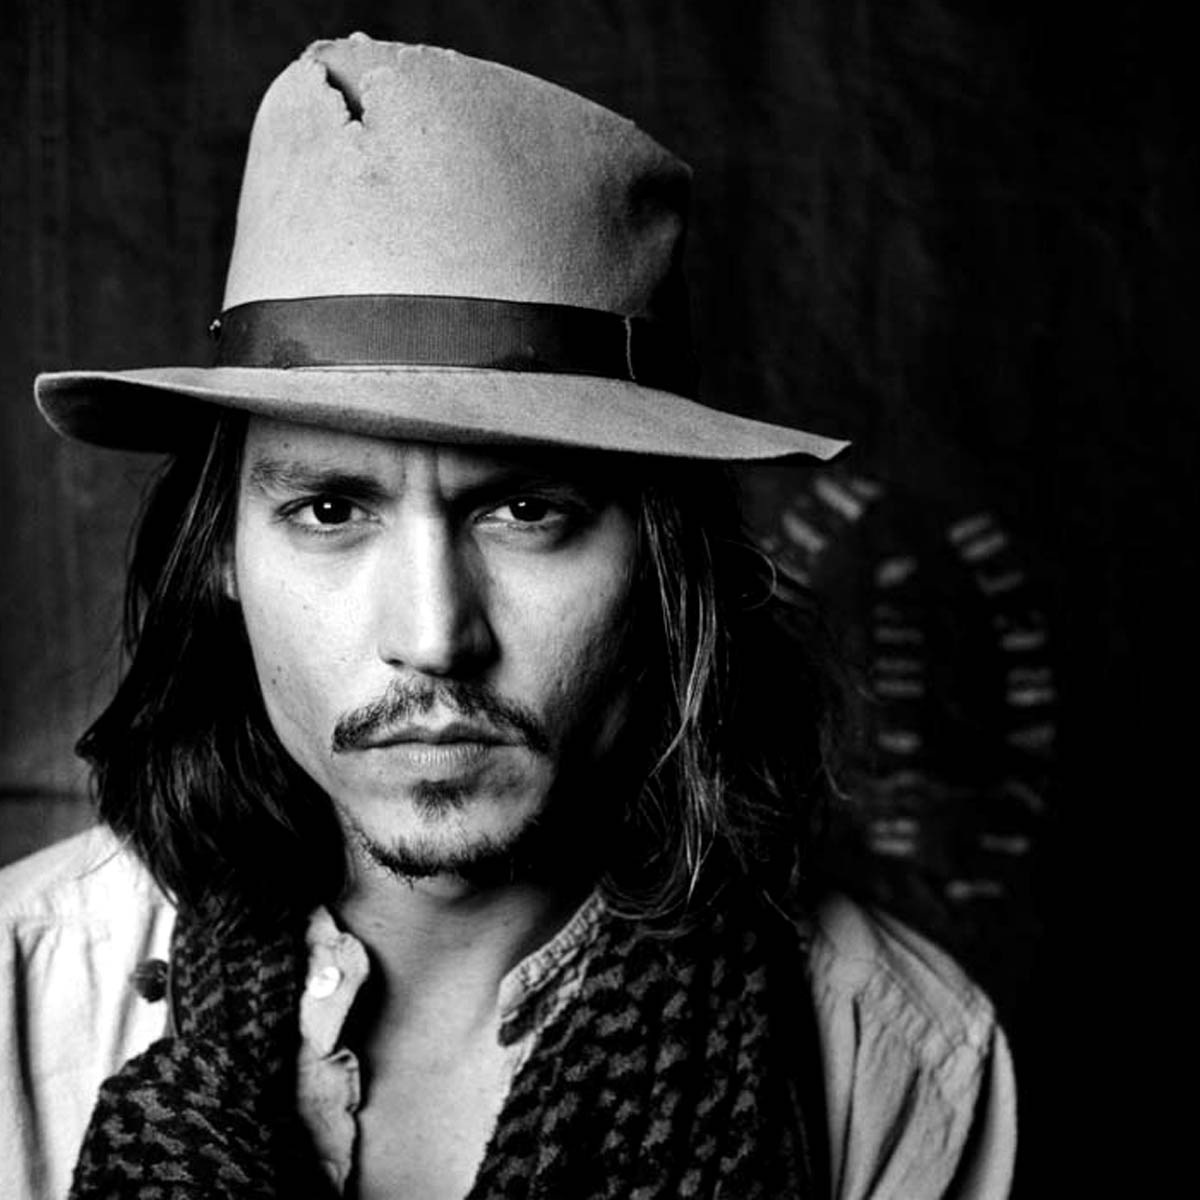 johnny-depp-beard-style-pictures-young-tumblr-212455883.jpg